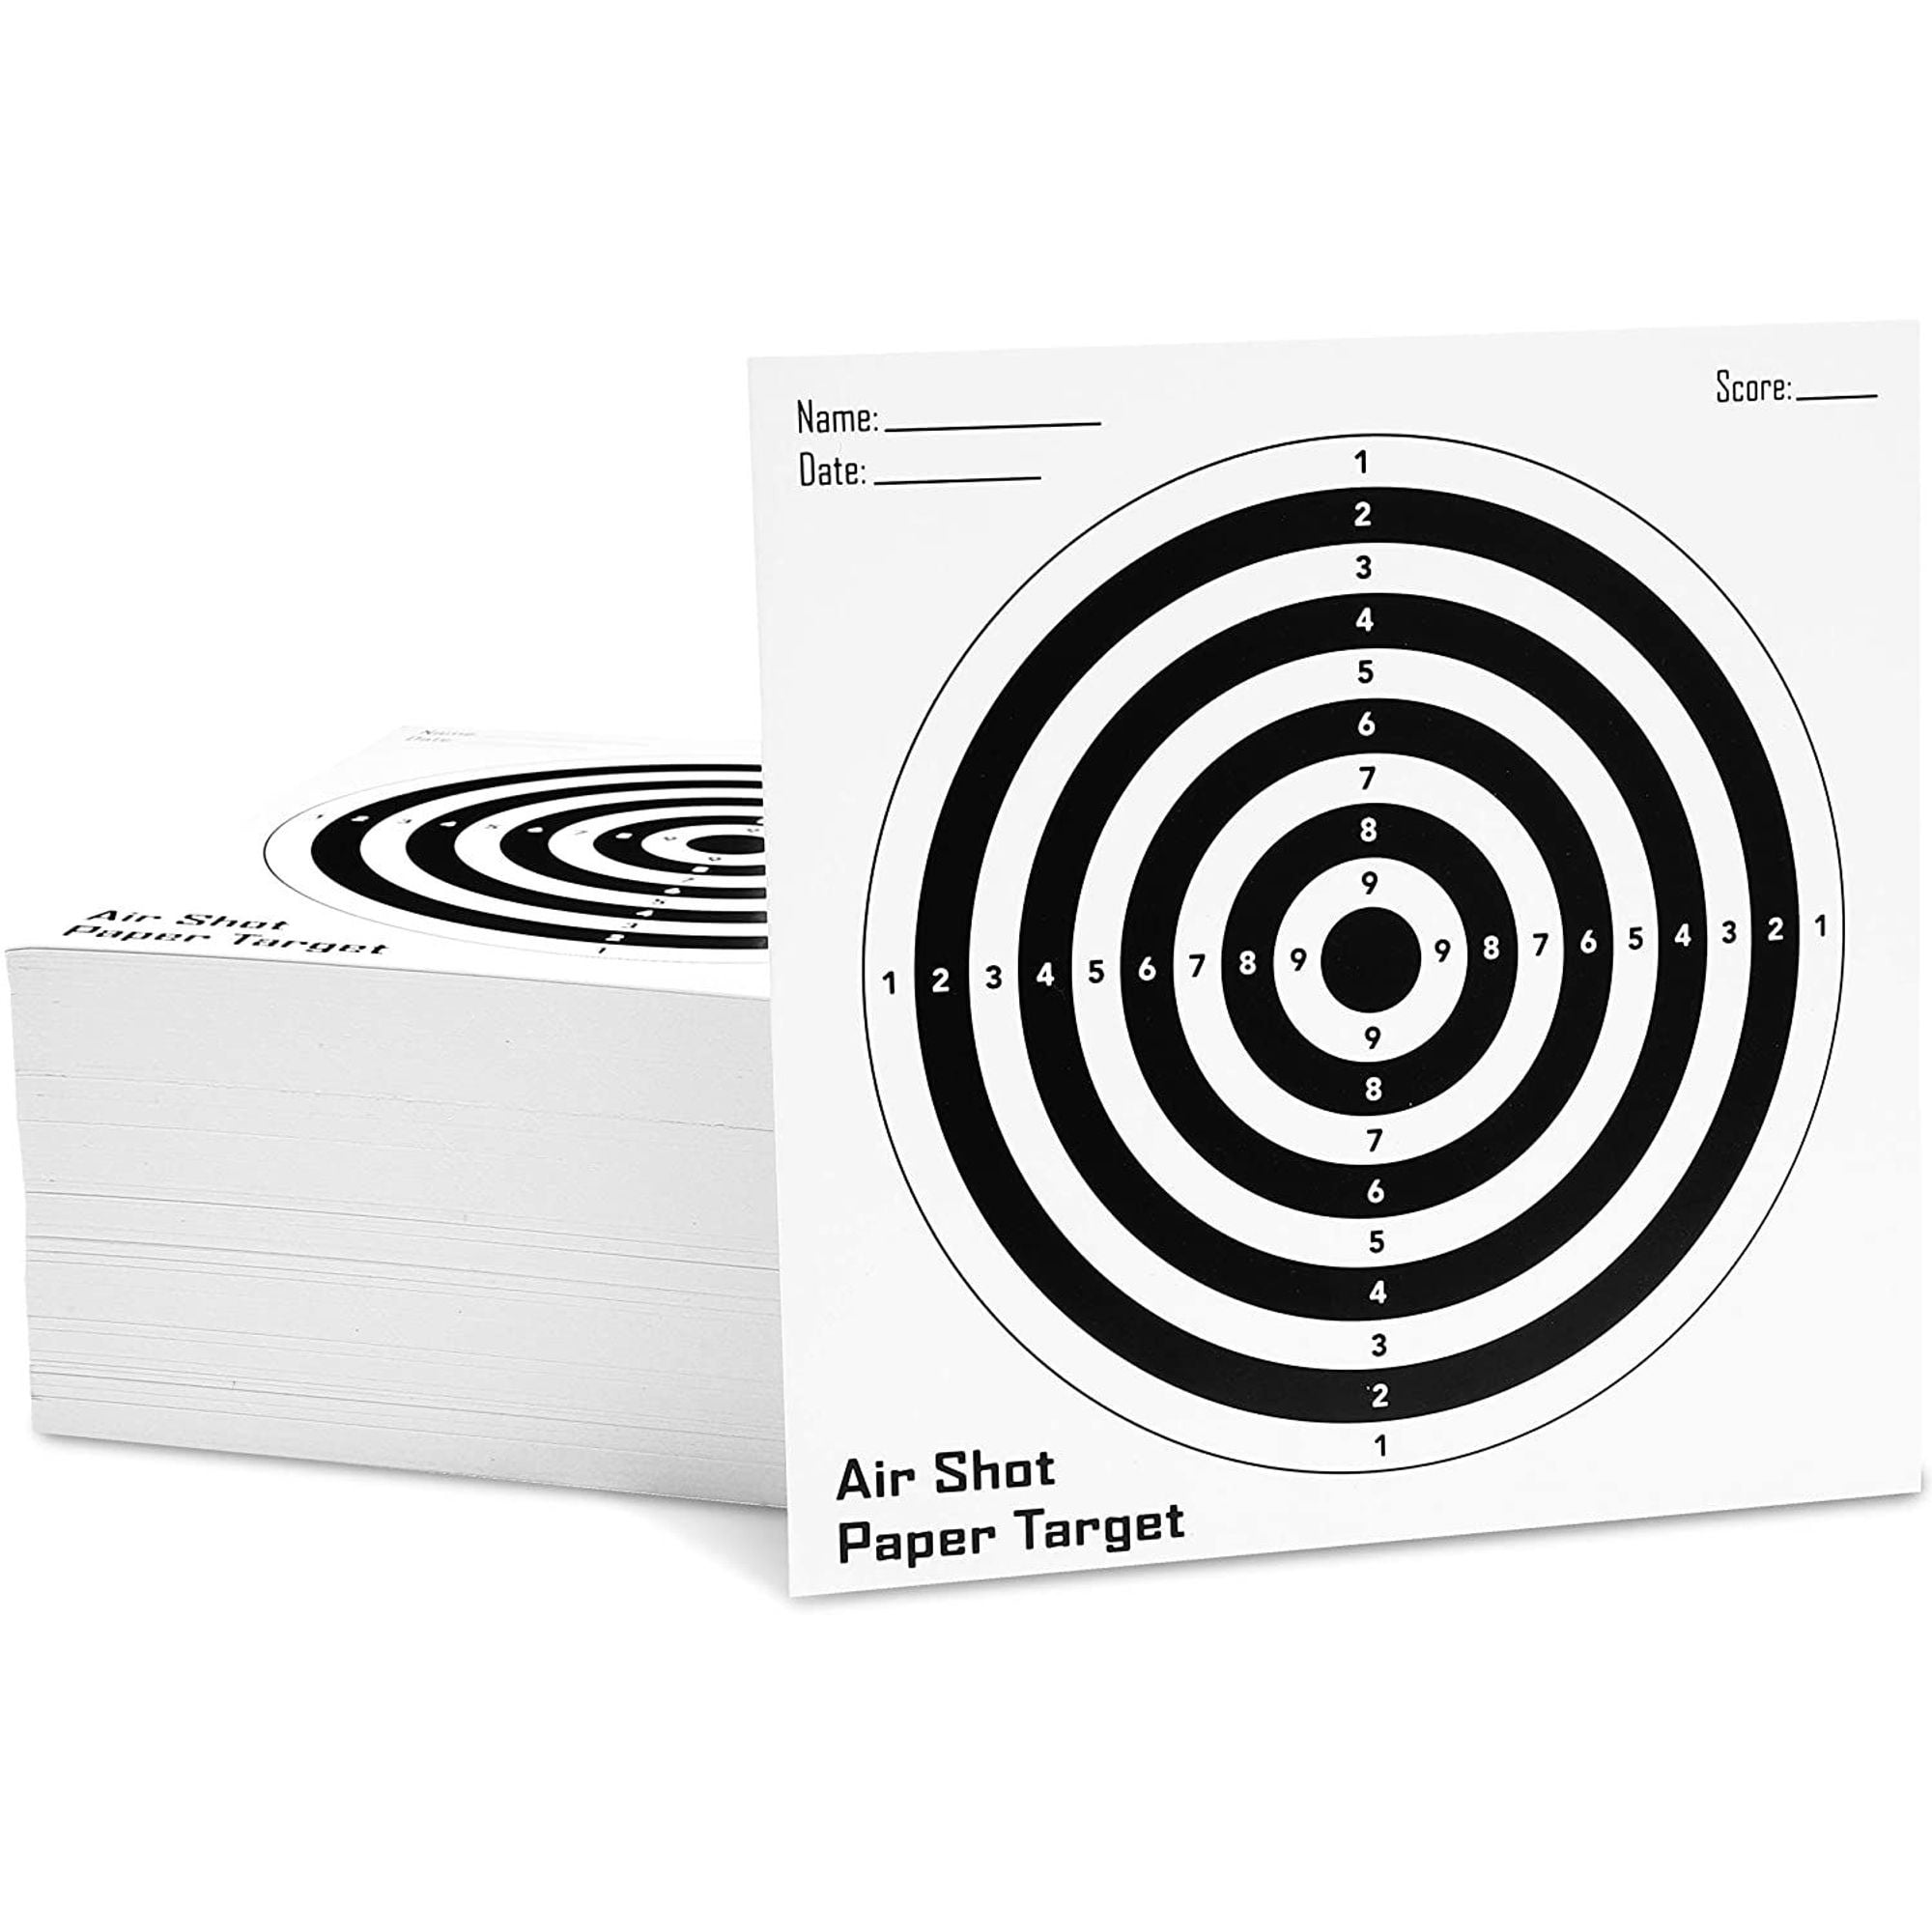 100 Self Correct paper shooting targets  FREE SHIPPING 